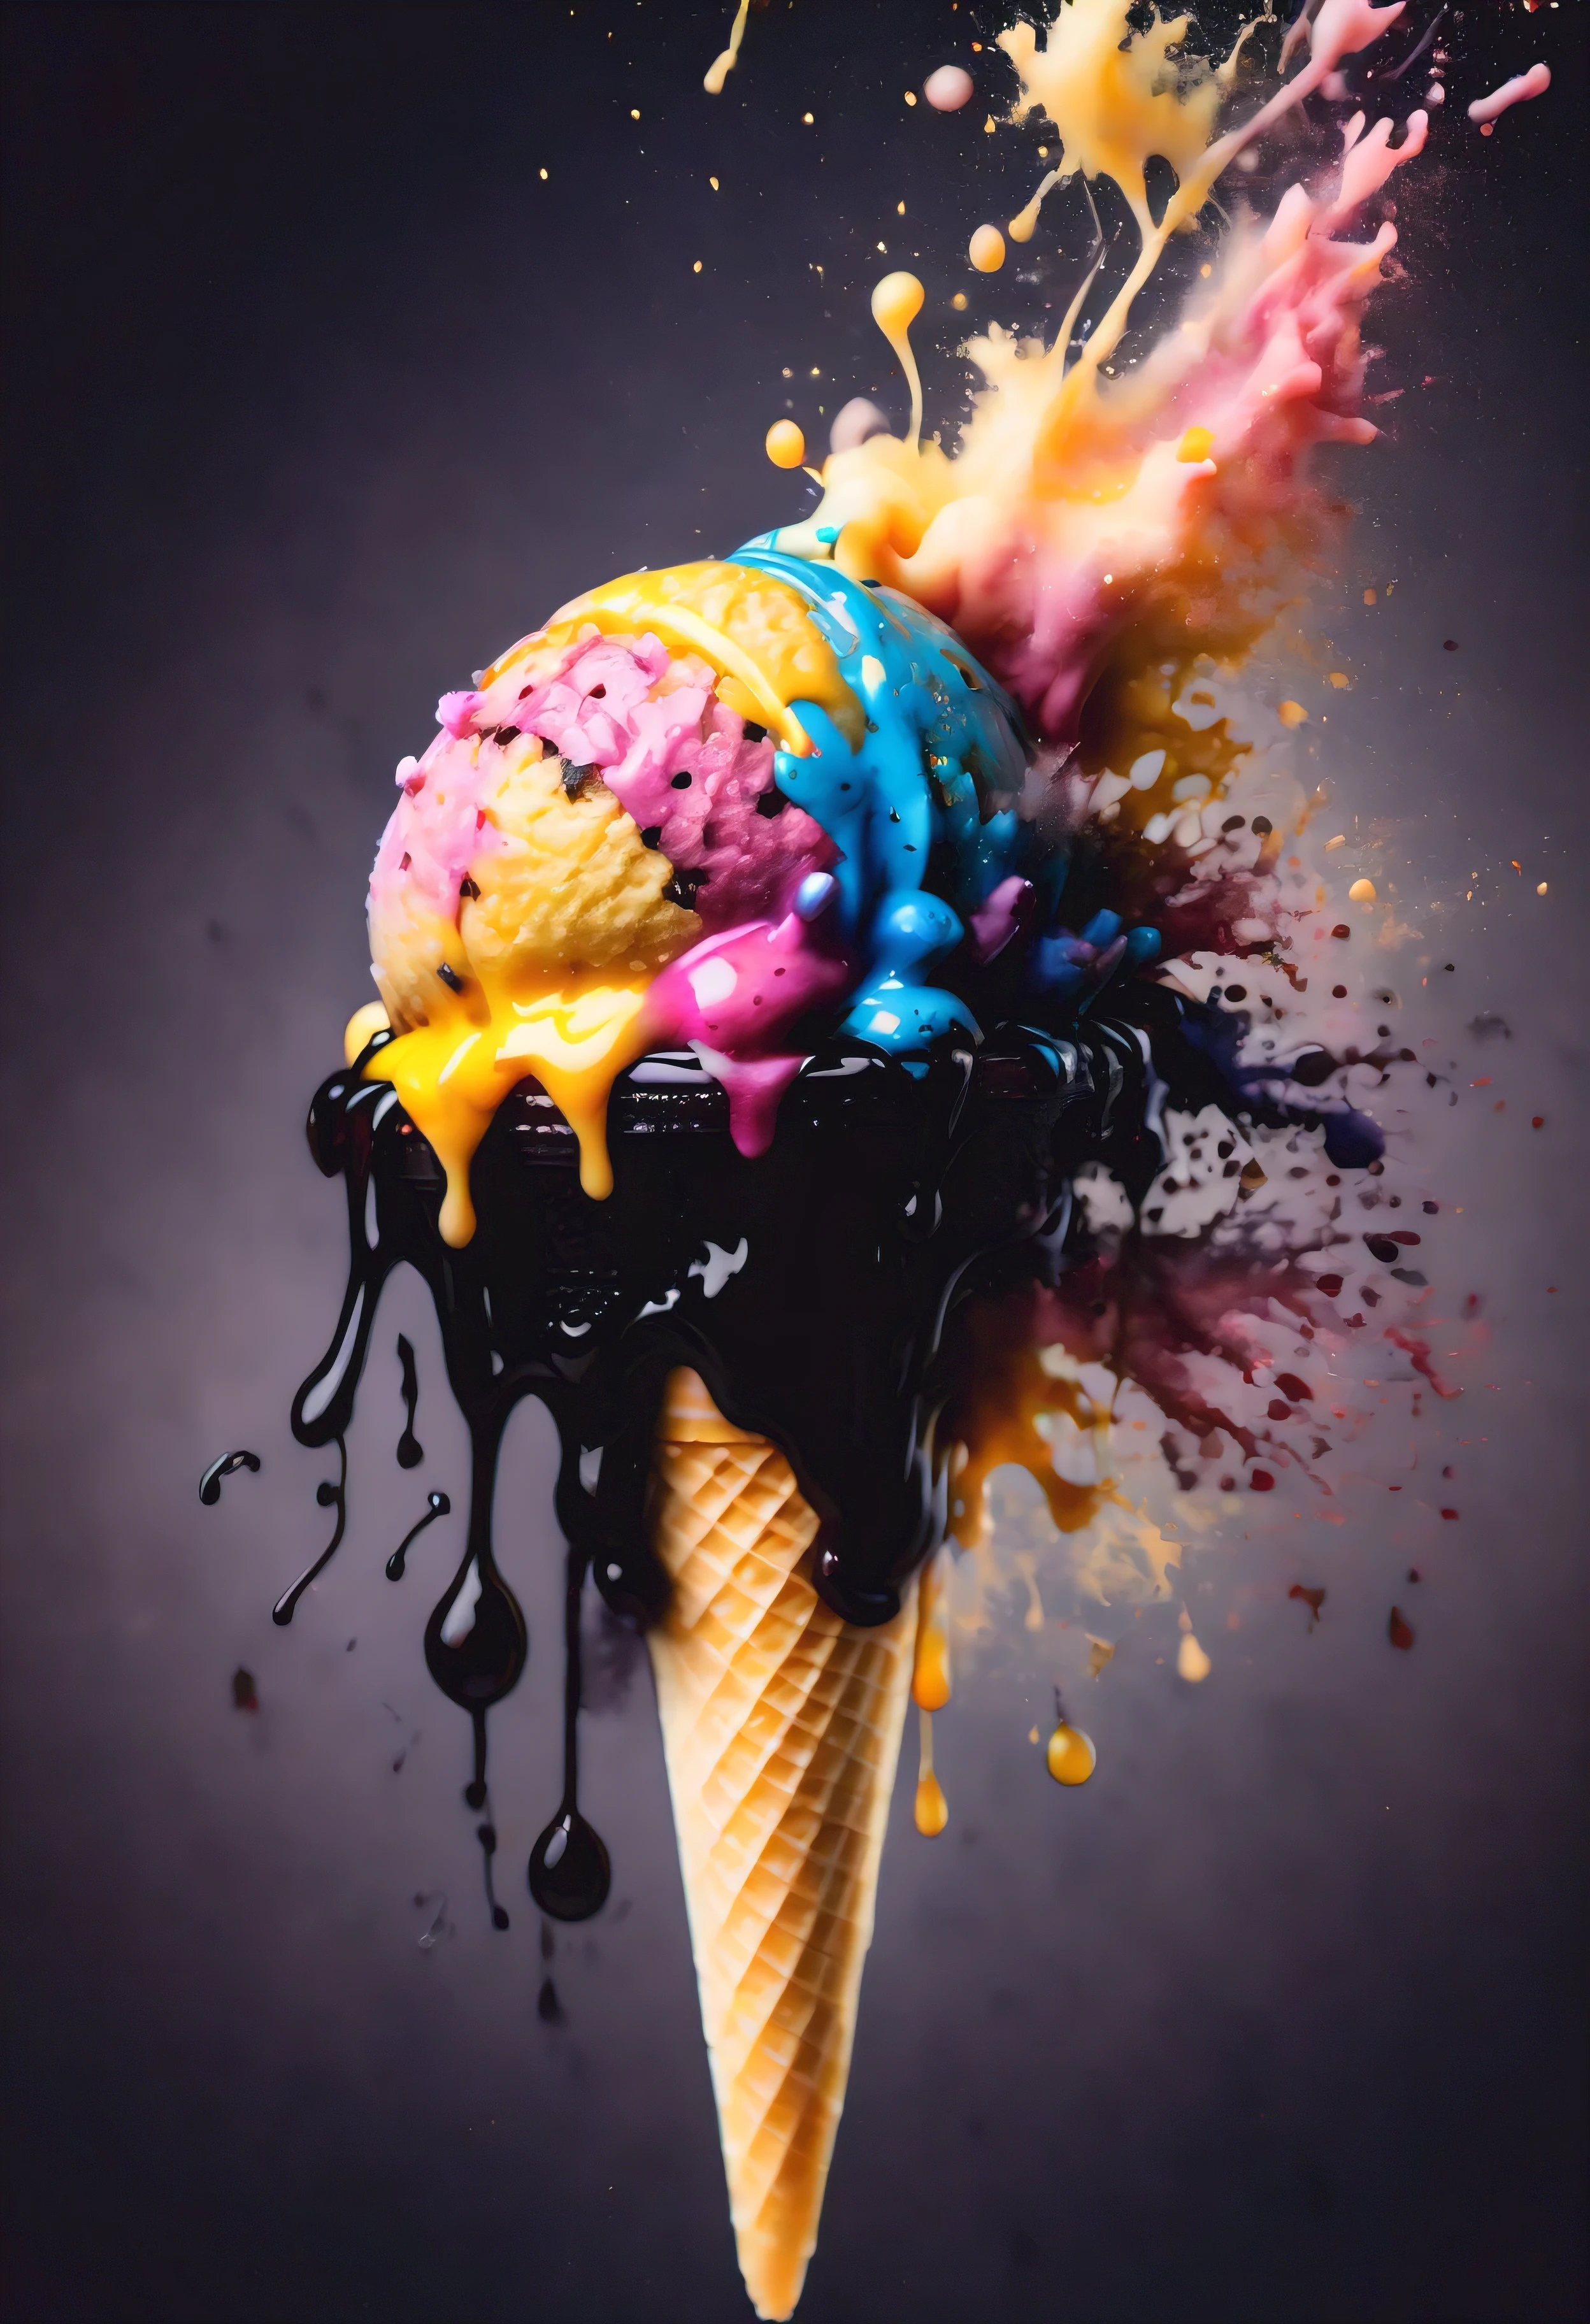 ((Masterpiece in maximum 16K resolution):1.6),((soft_color_photograpy:)1.5), ((ink_splatter_styles):1.4),((Movie-like still images and dynamic angles):1.3),| Macro shot, cinematic photo of a napolitano ice cream, ink_splatter_style, dark shot, film grain, extremely detailed, All captured with sharp focus.